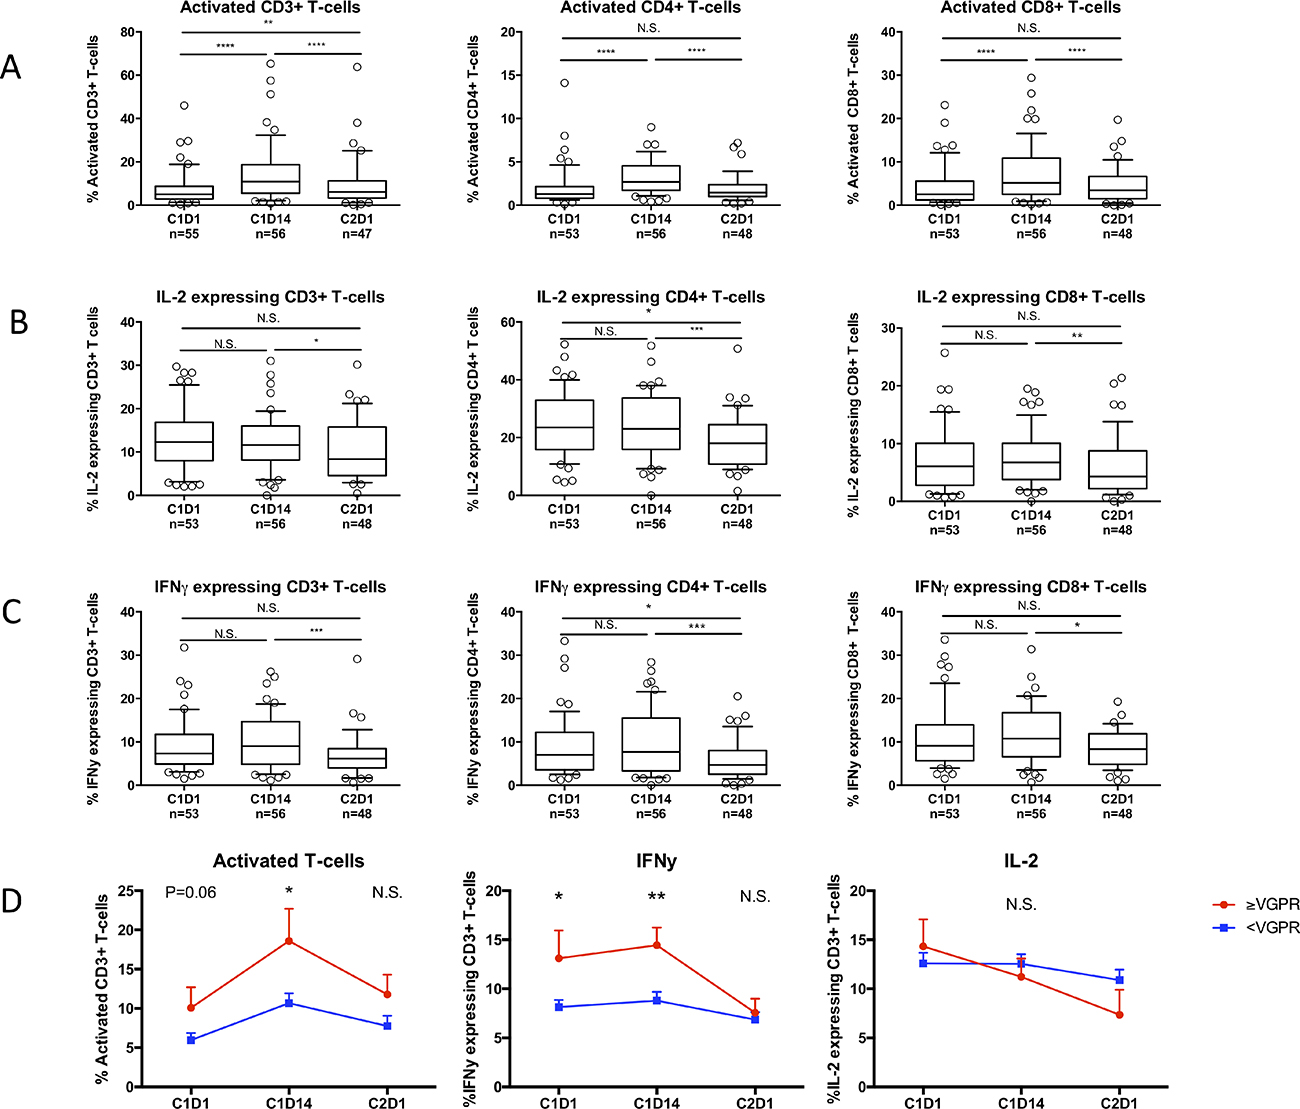 Effects of REP treatment on T-cell activation and cytokine production in lenalidomide-refractory patients.